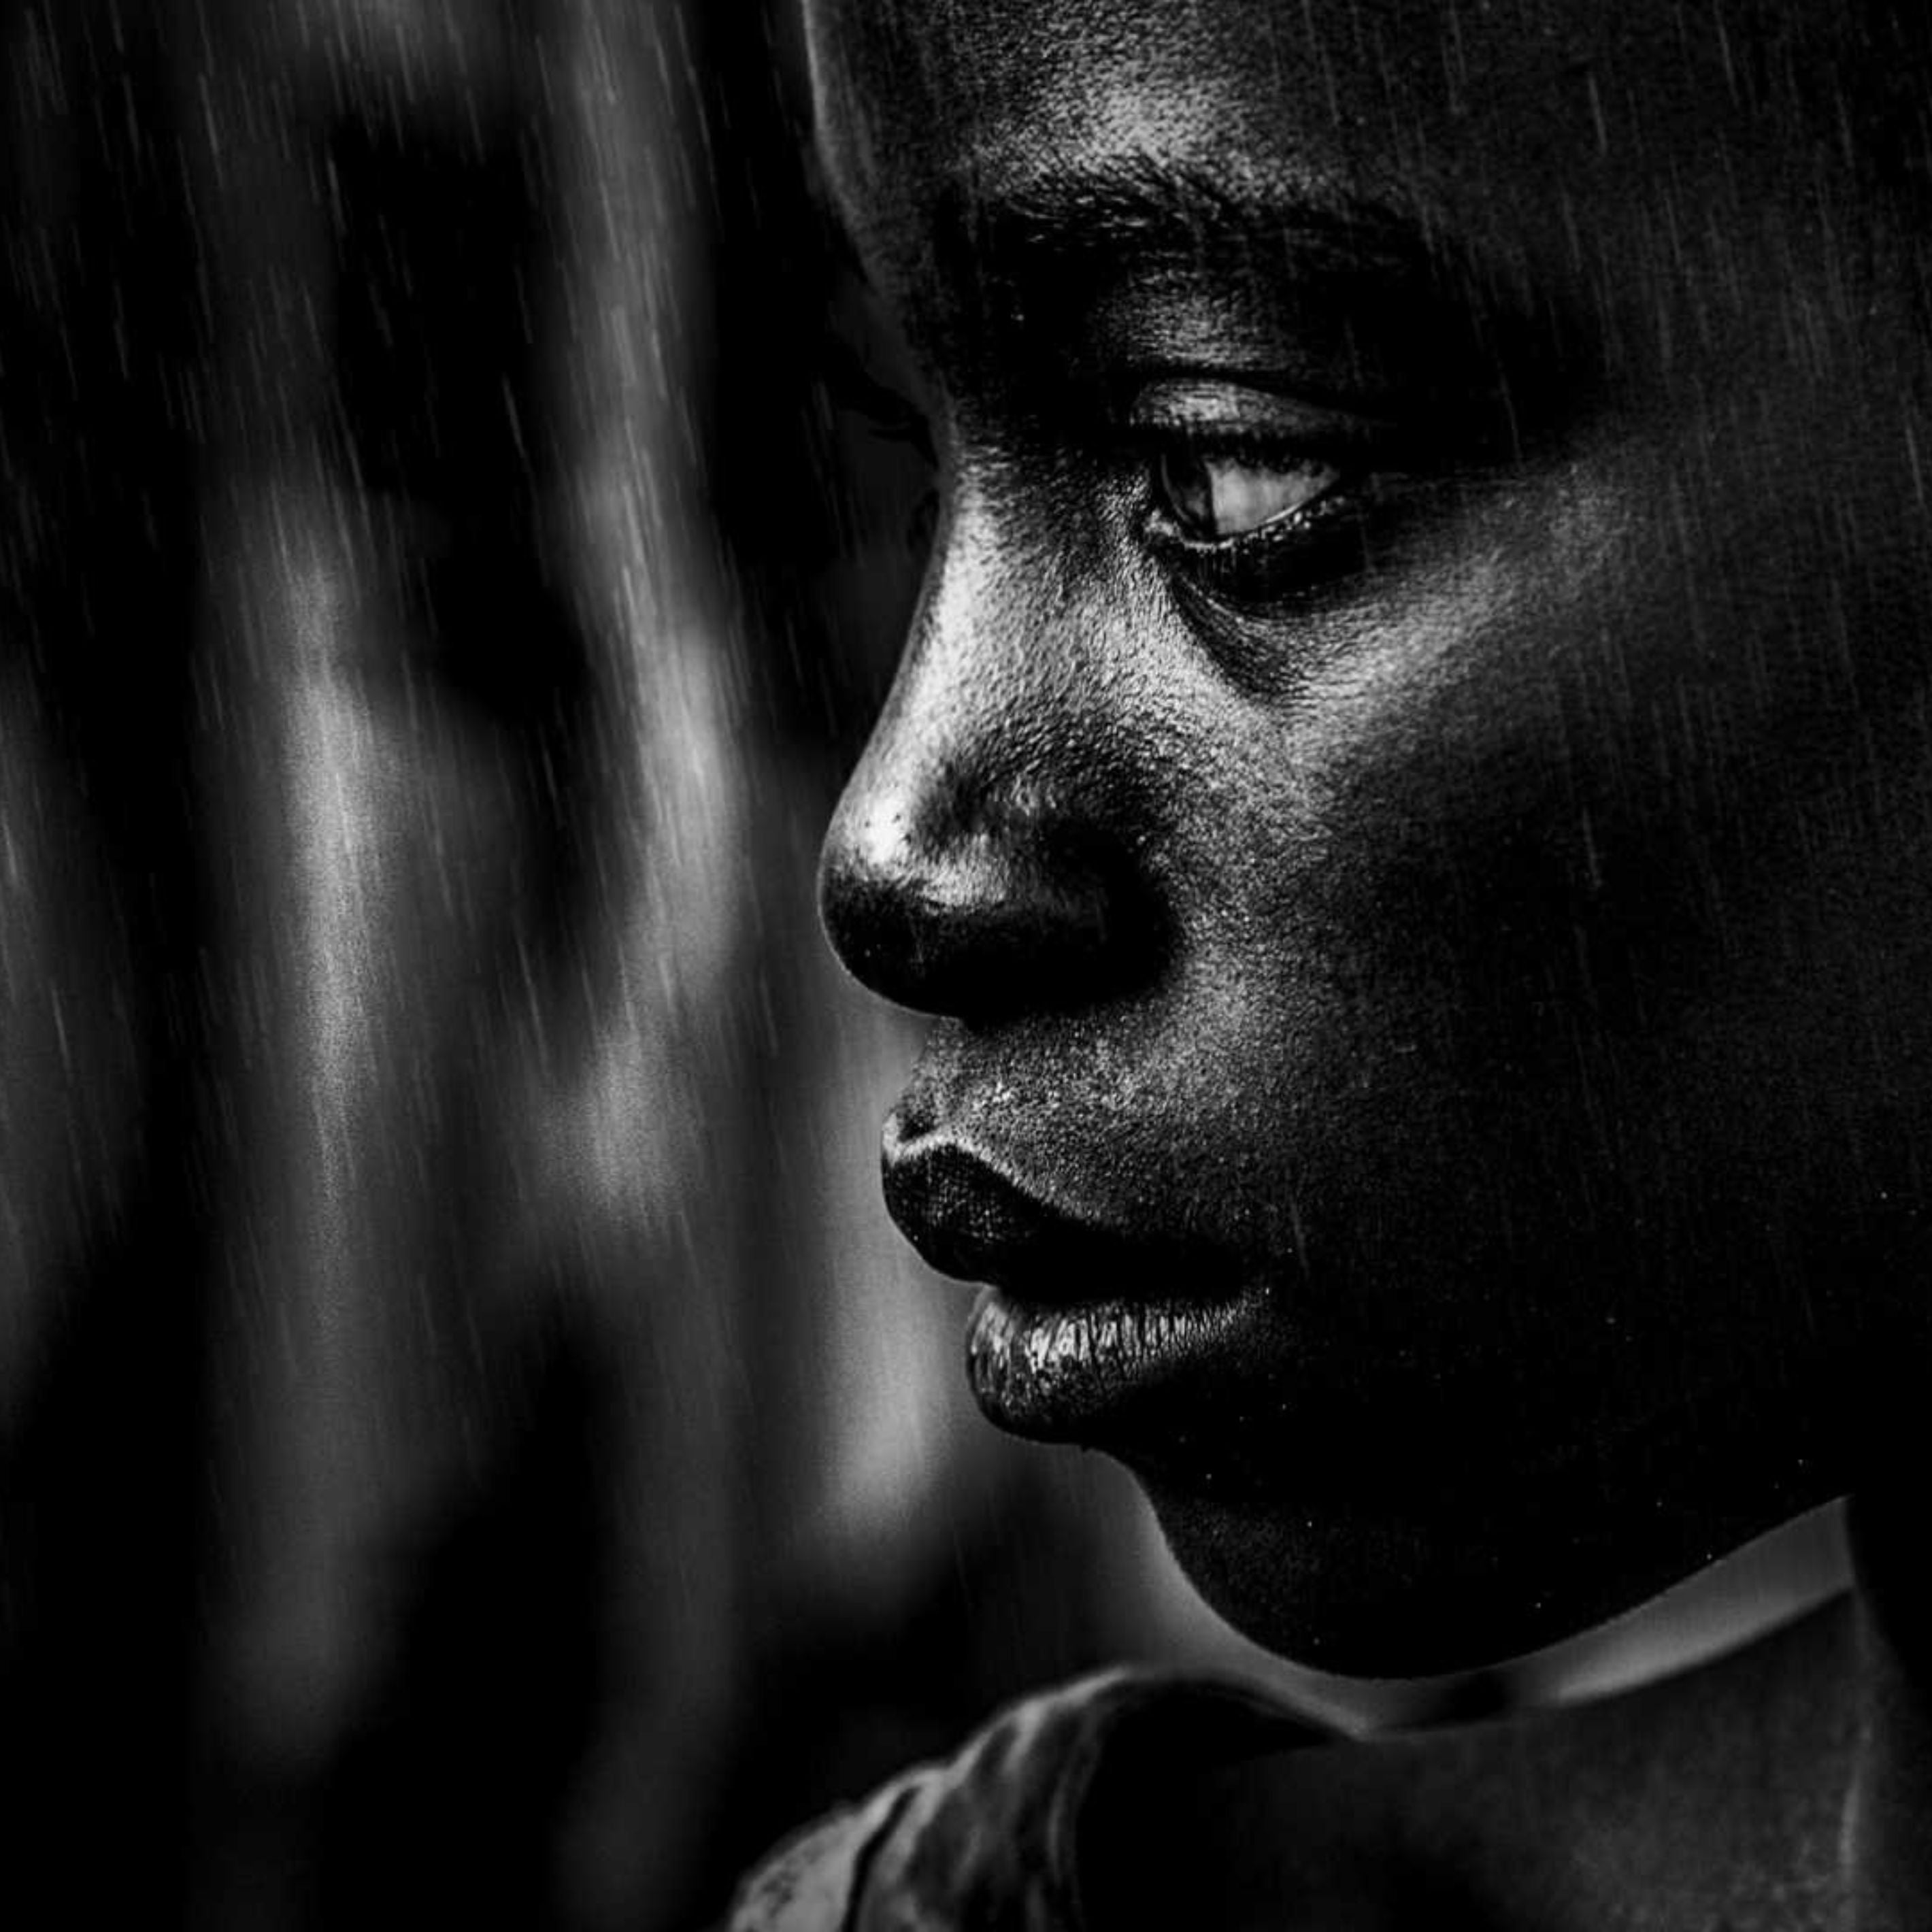 A child looking sad with grey & black background